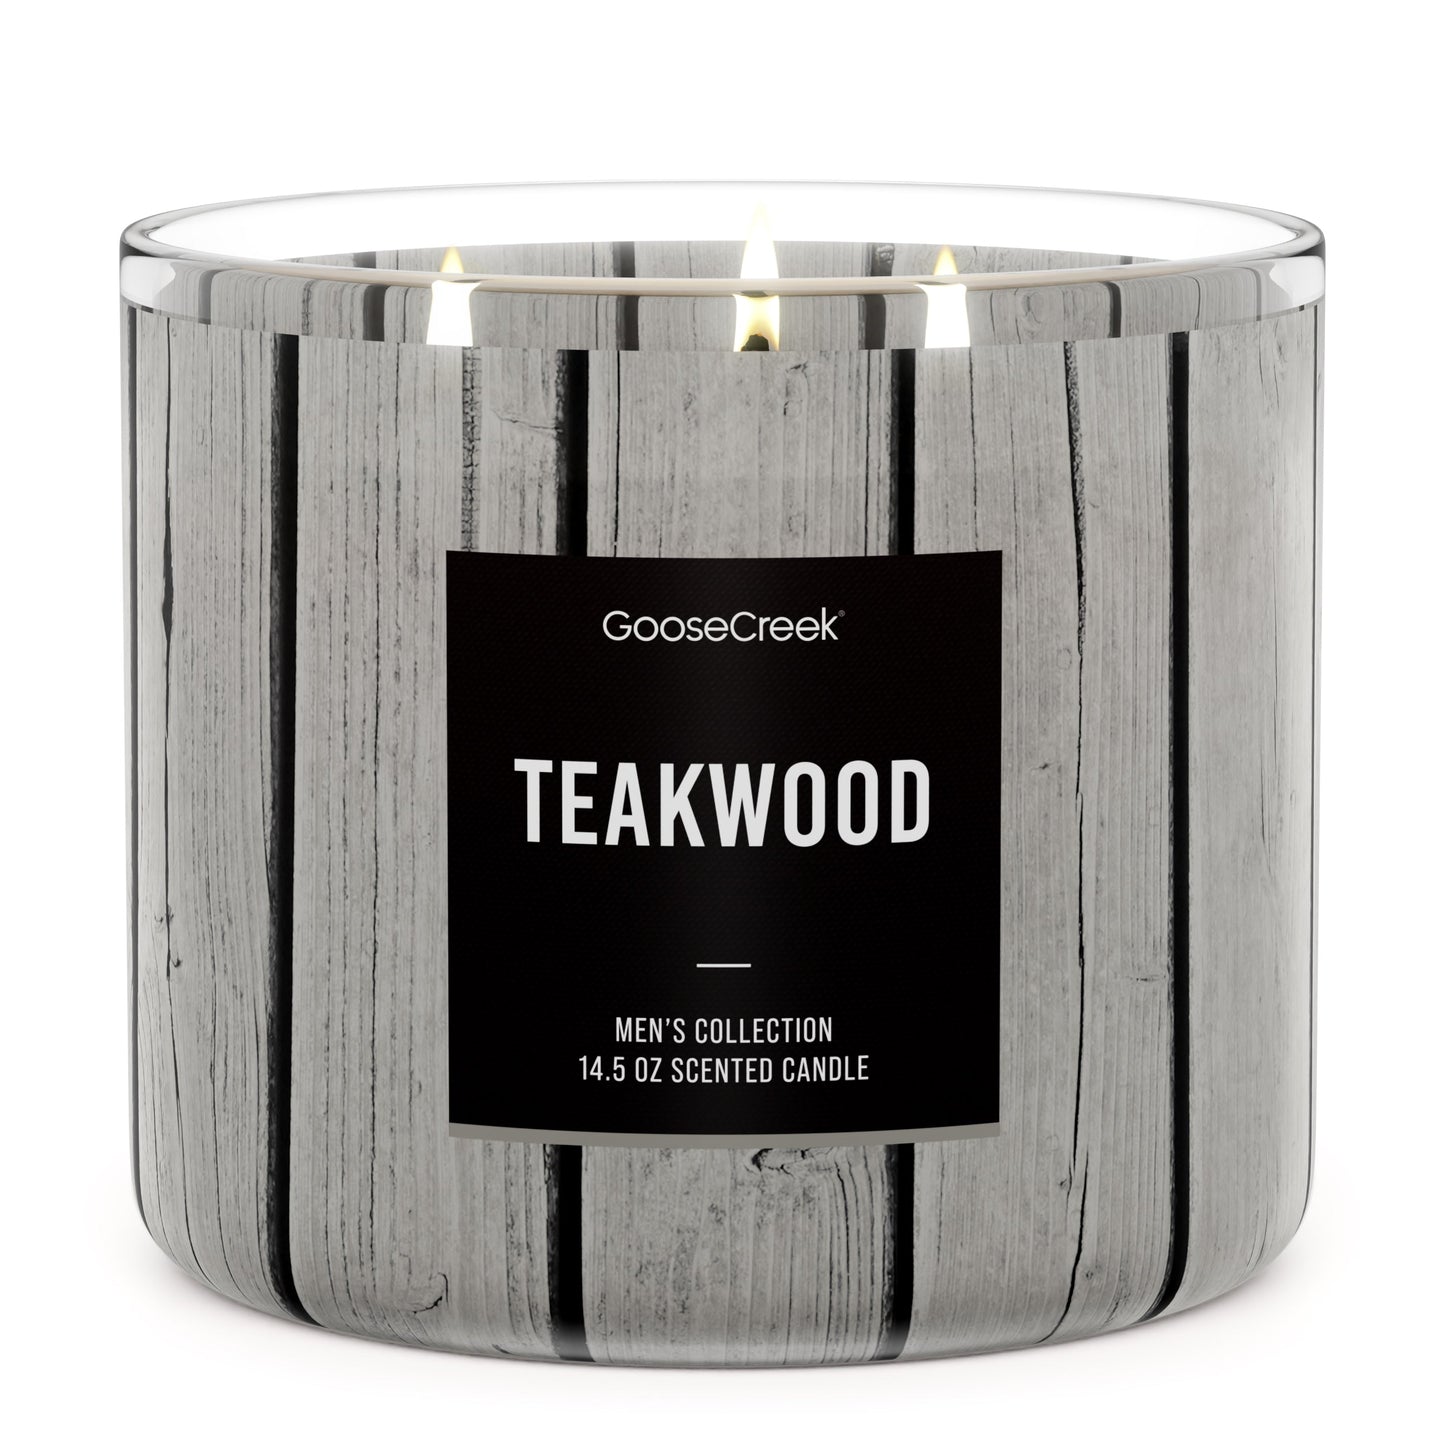 Mahogany and Teakwood Strong Fall and Winter Wood Scented Candle